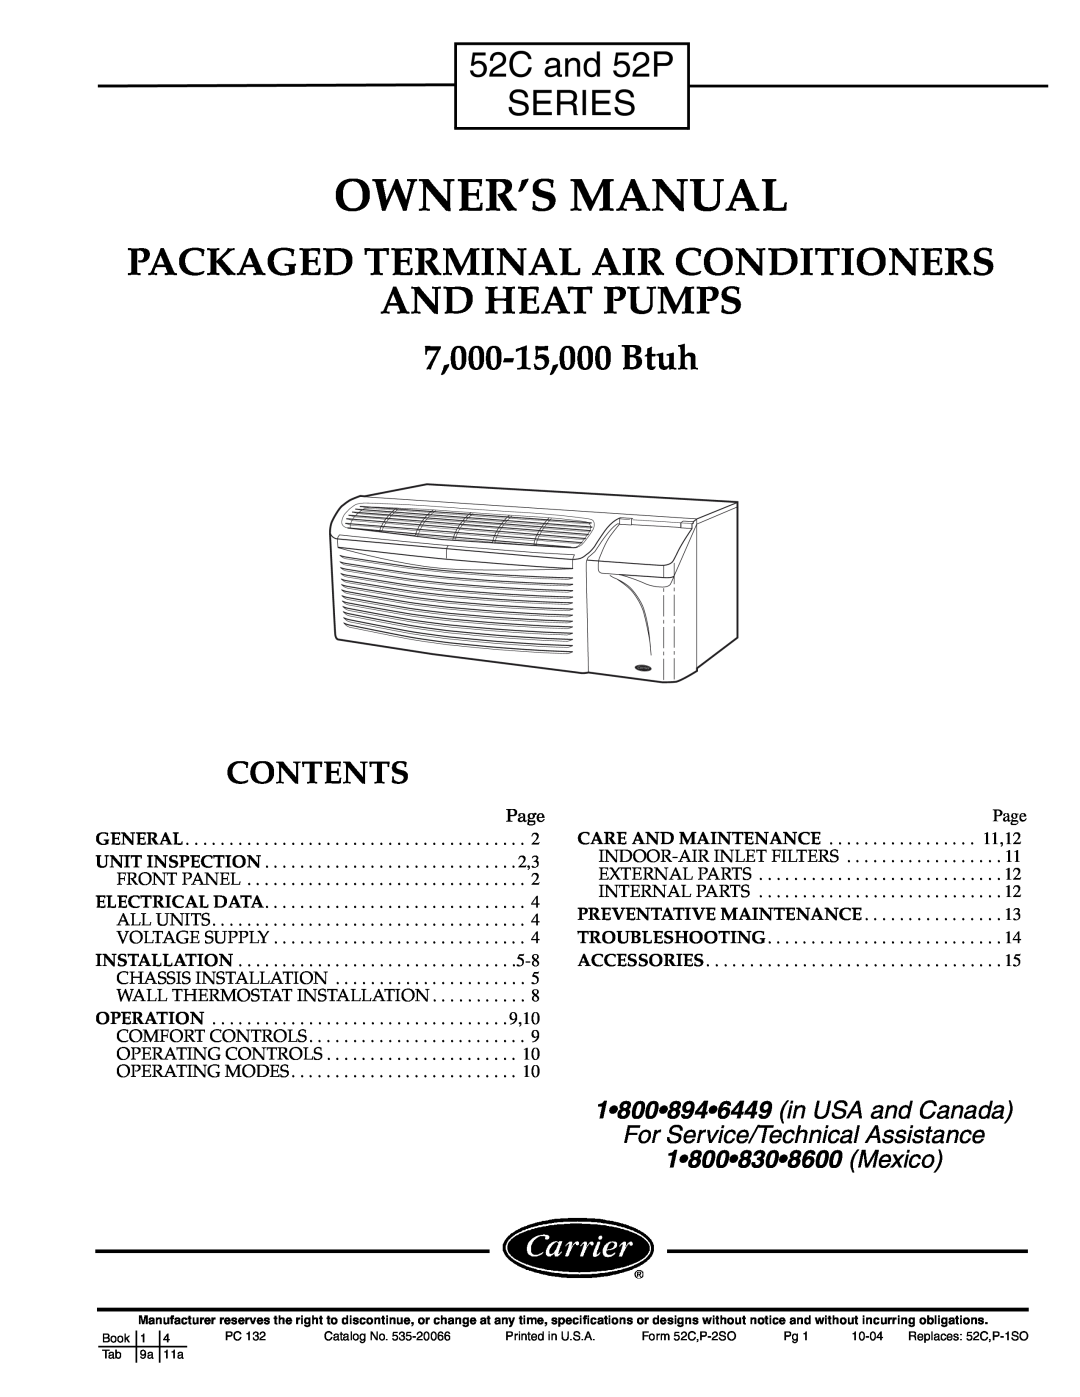 Carrier owner manual 52C 52Cand 52P, Series, Contents, Packaged Terminal Air Conditioners And Heat Pumps 